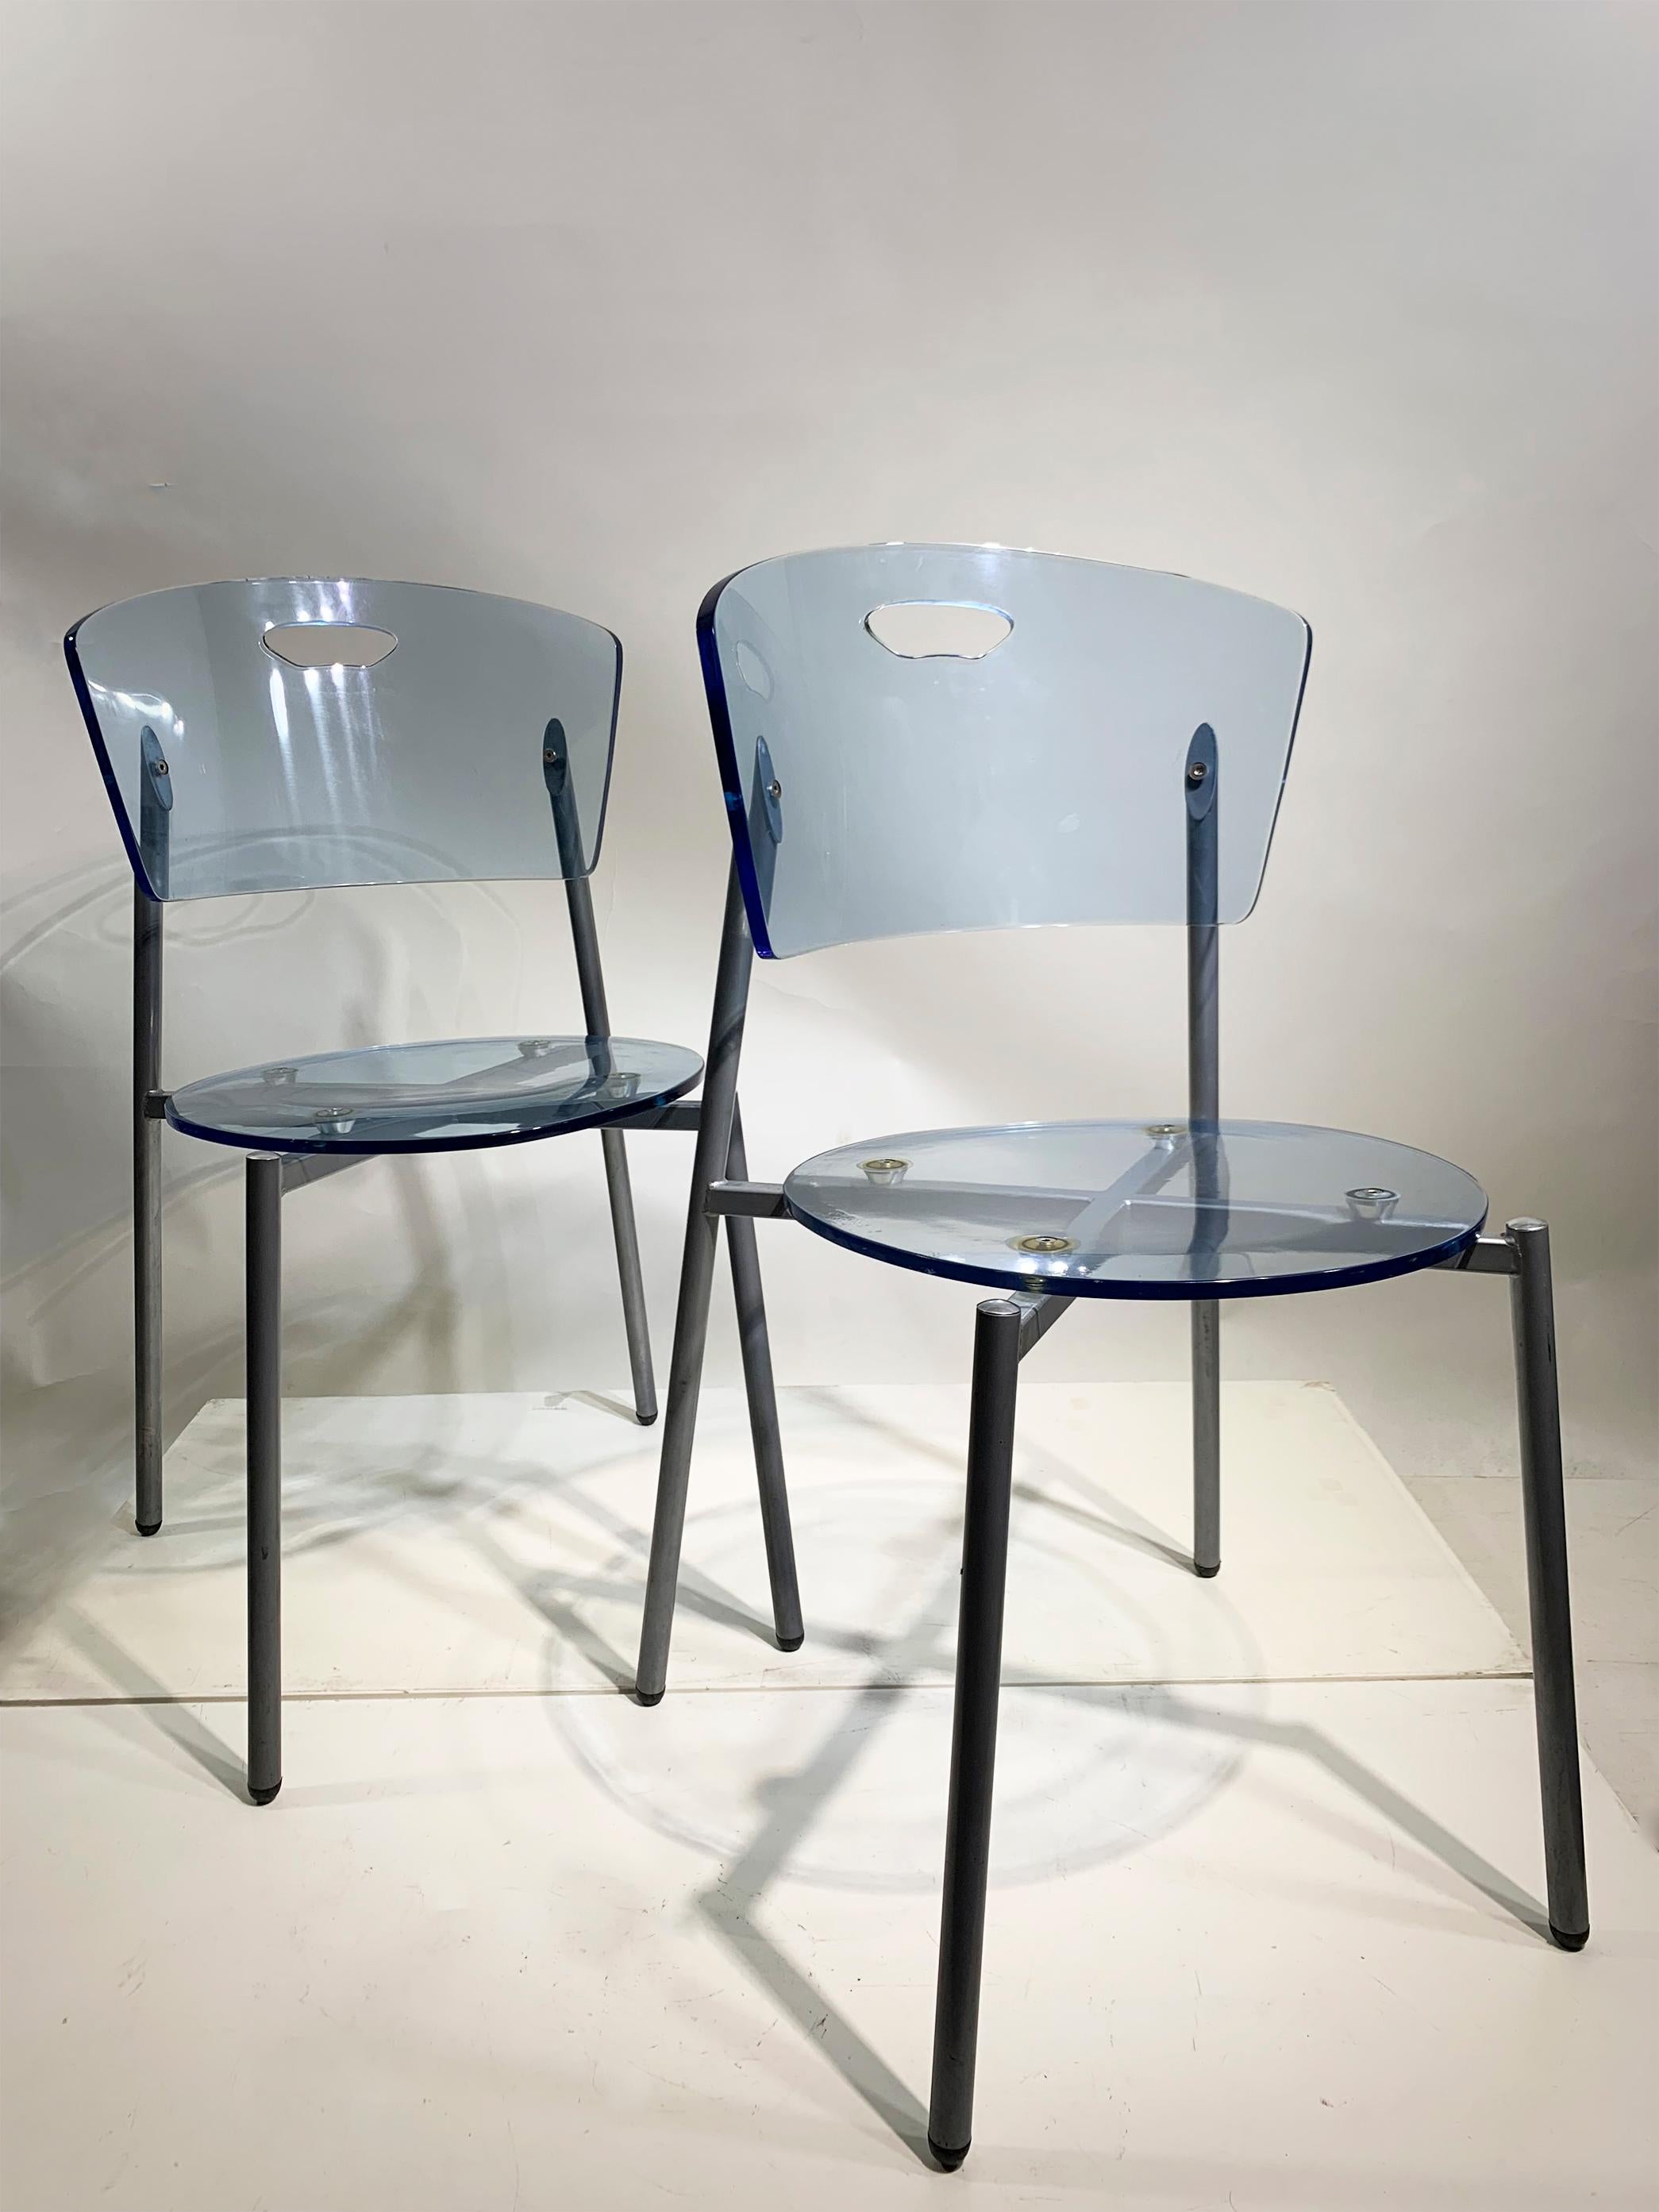 A harmonious blend of modern design and functionality, this exquisite chair boasts a distinctive curved backrest that seamlessly complements its rounded blue opaque plastic seat, creating a visually captivating silhouette.

Crafted with precision